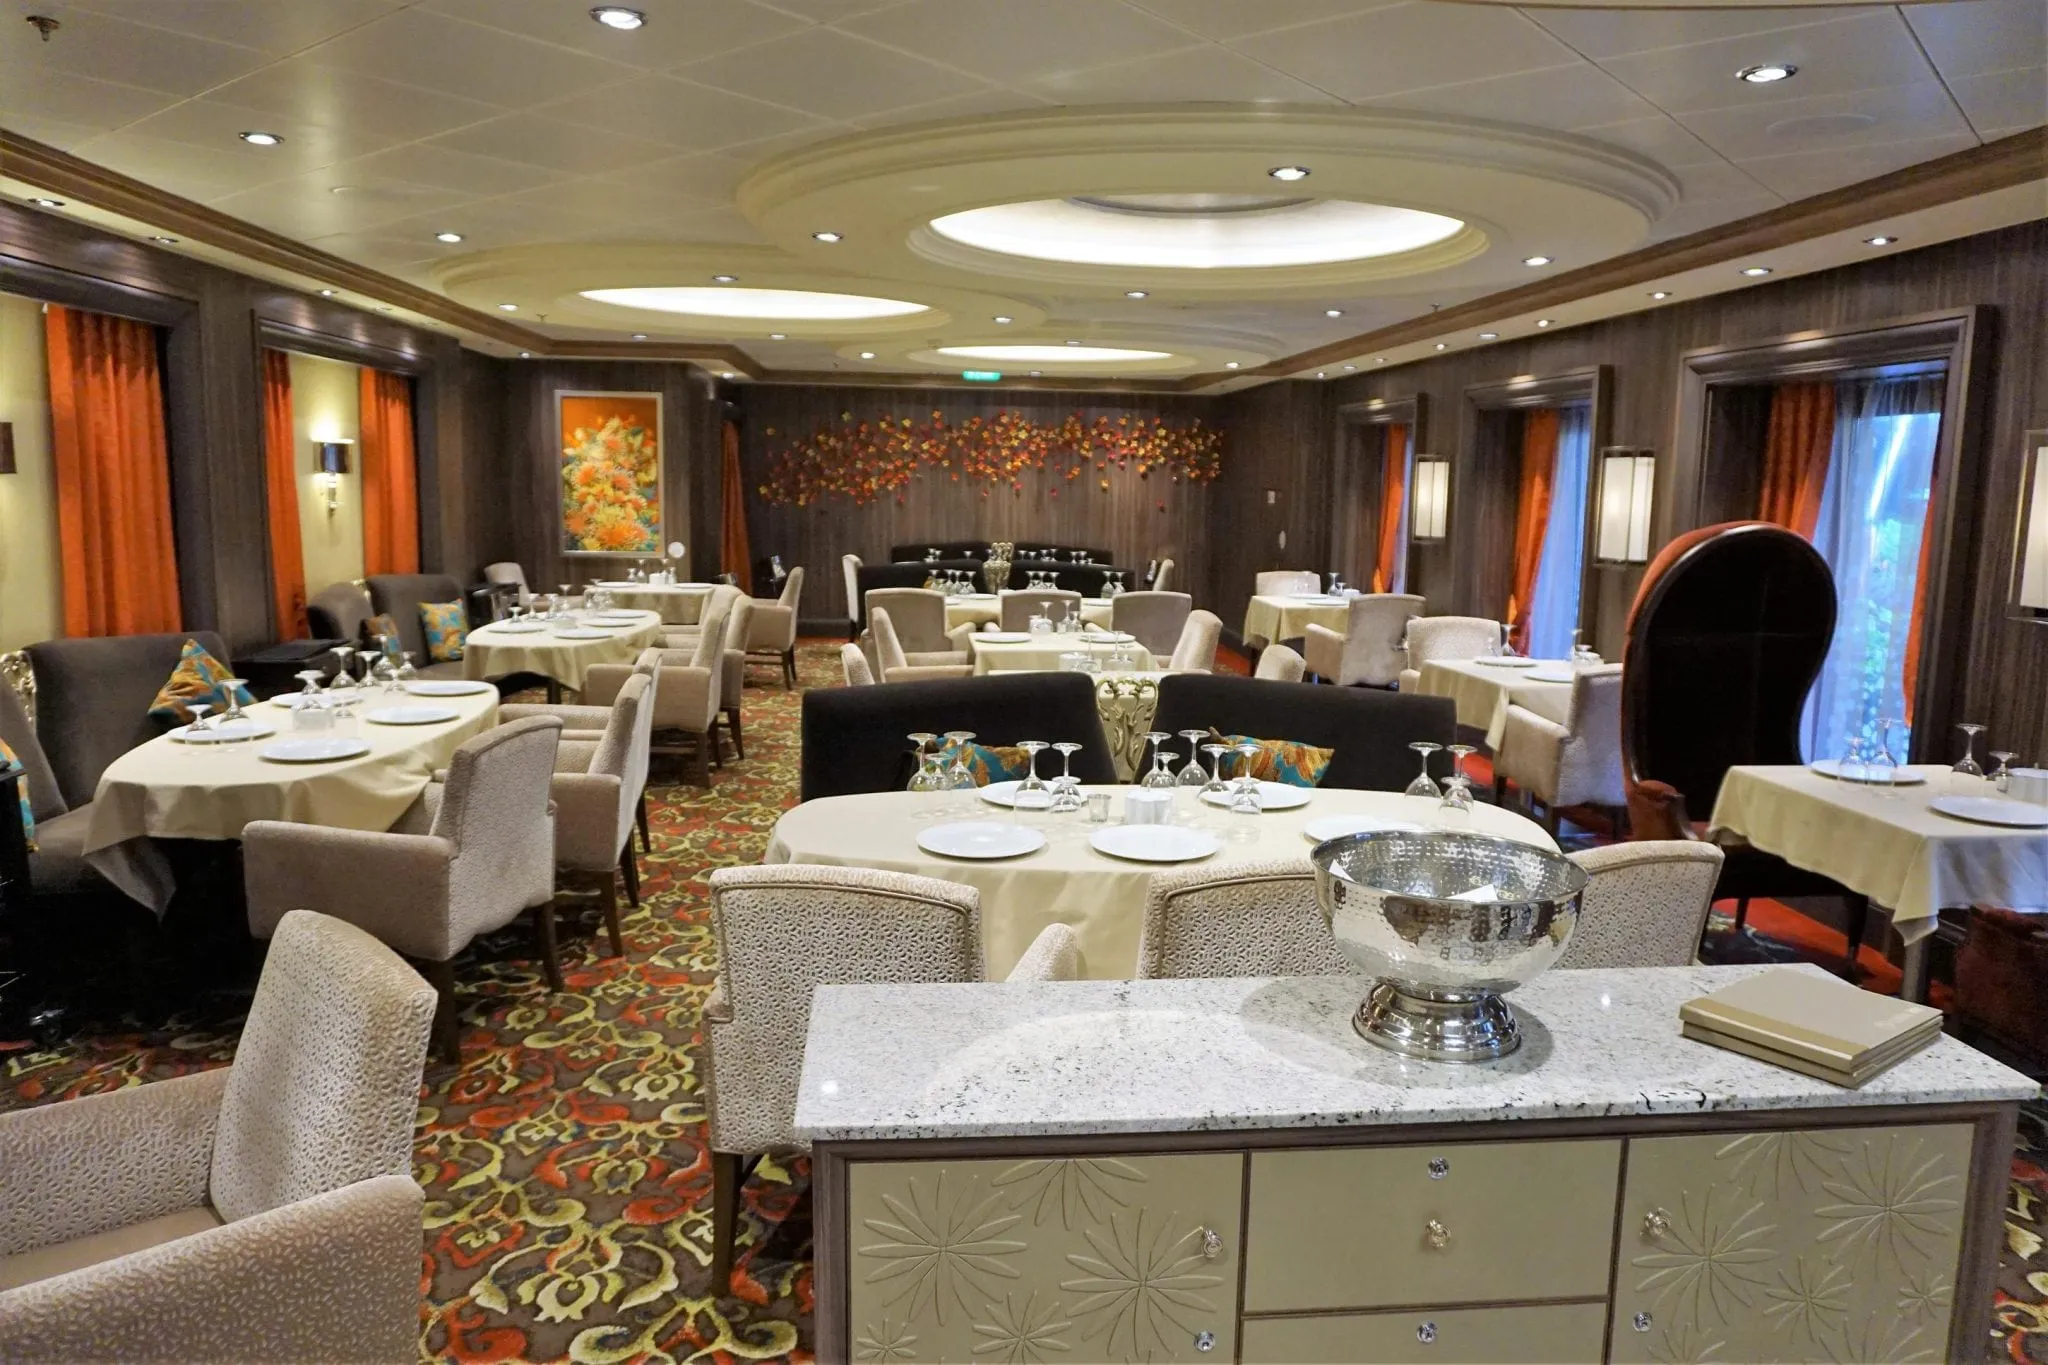 150 Central Park Harmony of the Seas Review